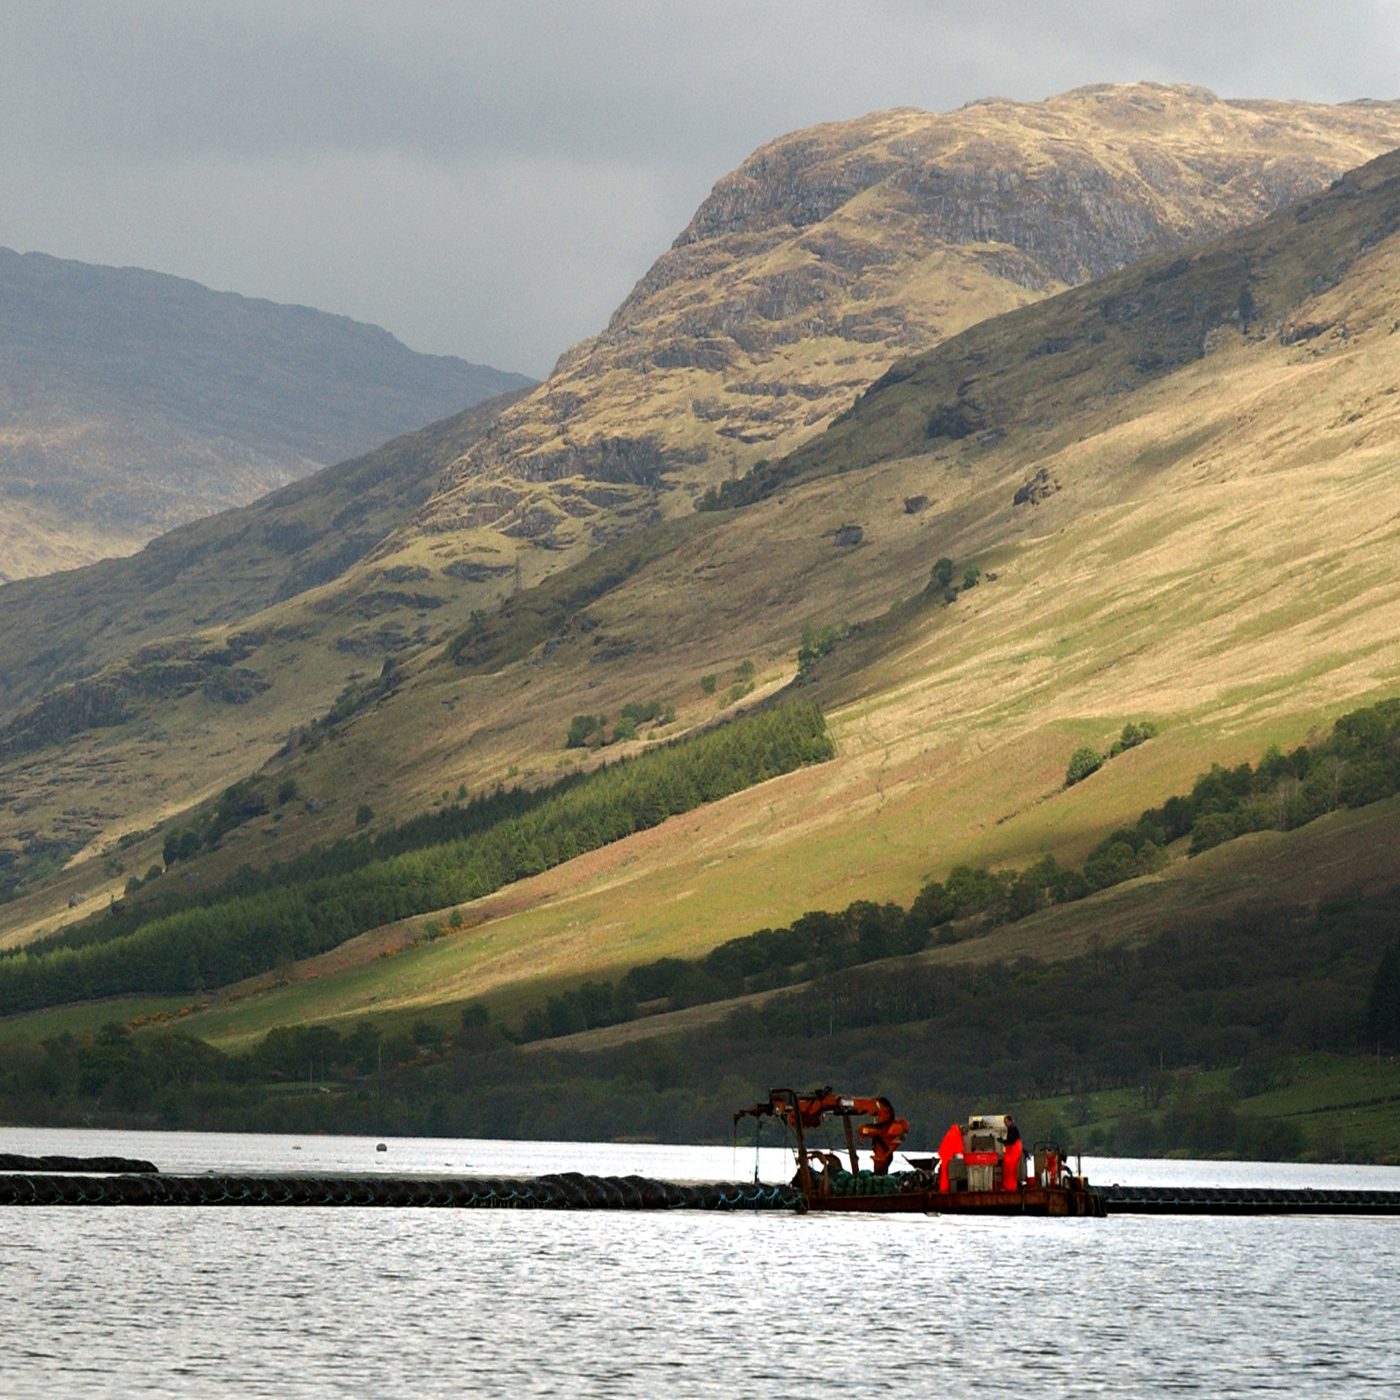 A catch of mussels is harvested on Loch Fyne